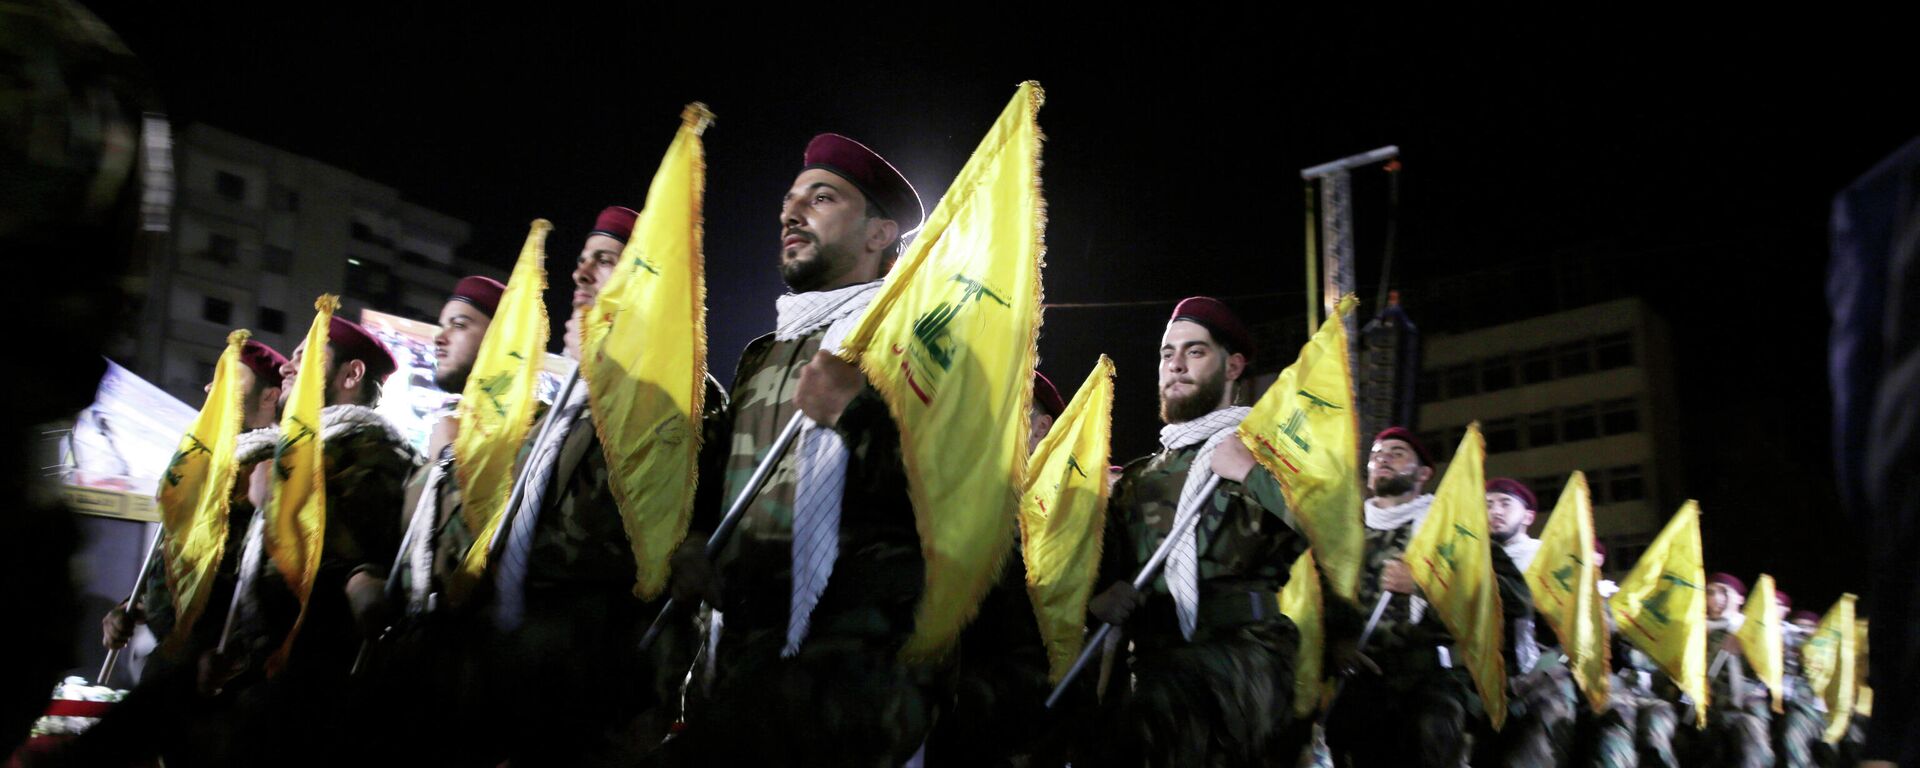  In this May 31, 2019 file photo, Hezbollah fighters march at a rally to mark Jerusalem day or Al-Quds day, in the southern Beirut suburb of Dahiyeh, Lebanon. On Monday, Oct. 18, 2021, Hezbollah leader Sheik Hassan Nasrallah revealed that his militant group has 100,000 trained fighters. - Sputnik Africa, 1920, 12.10.2023